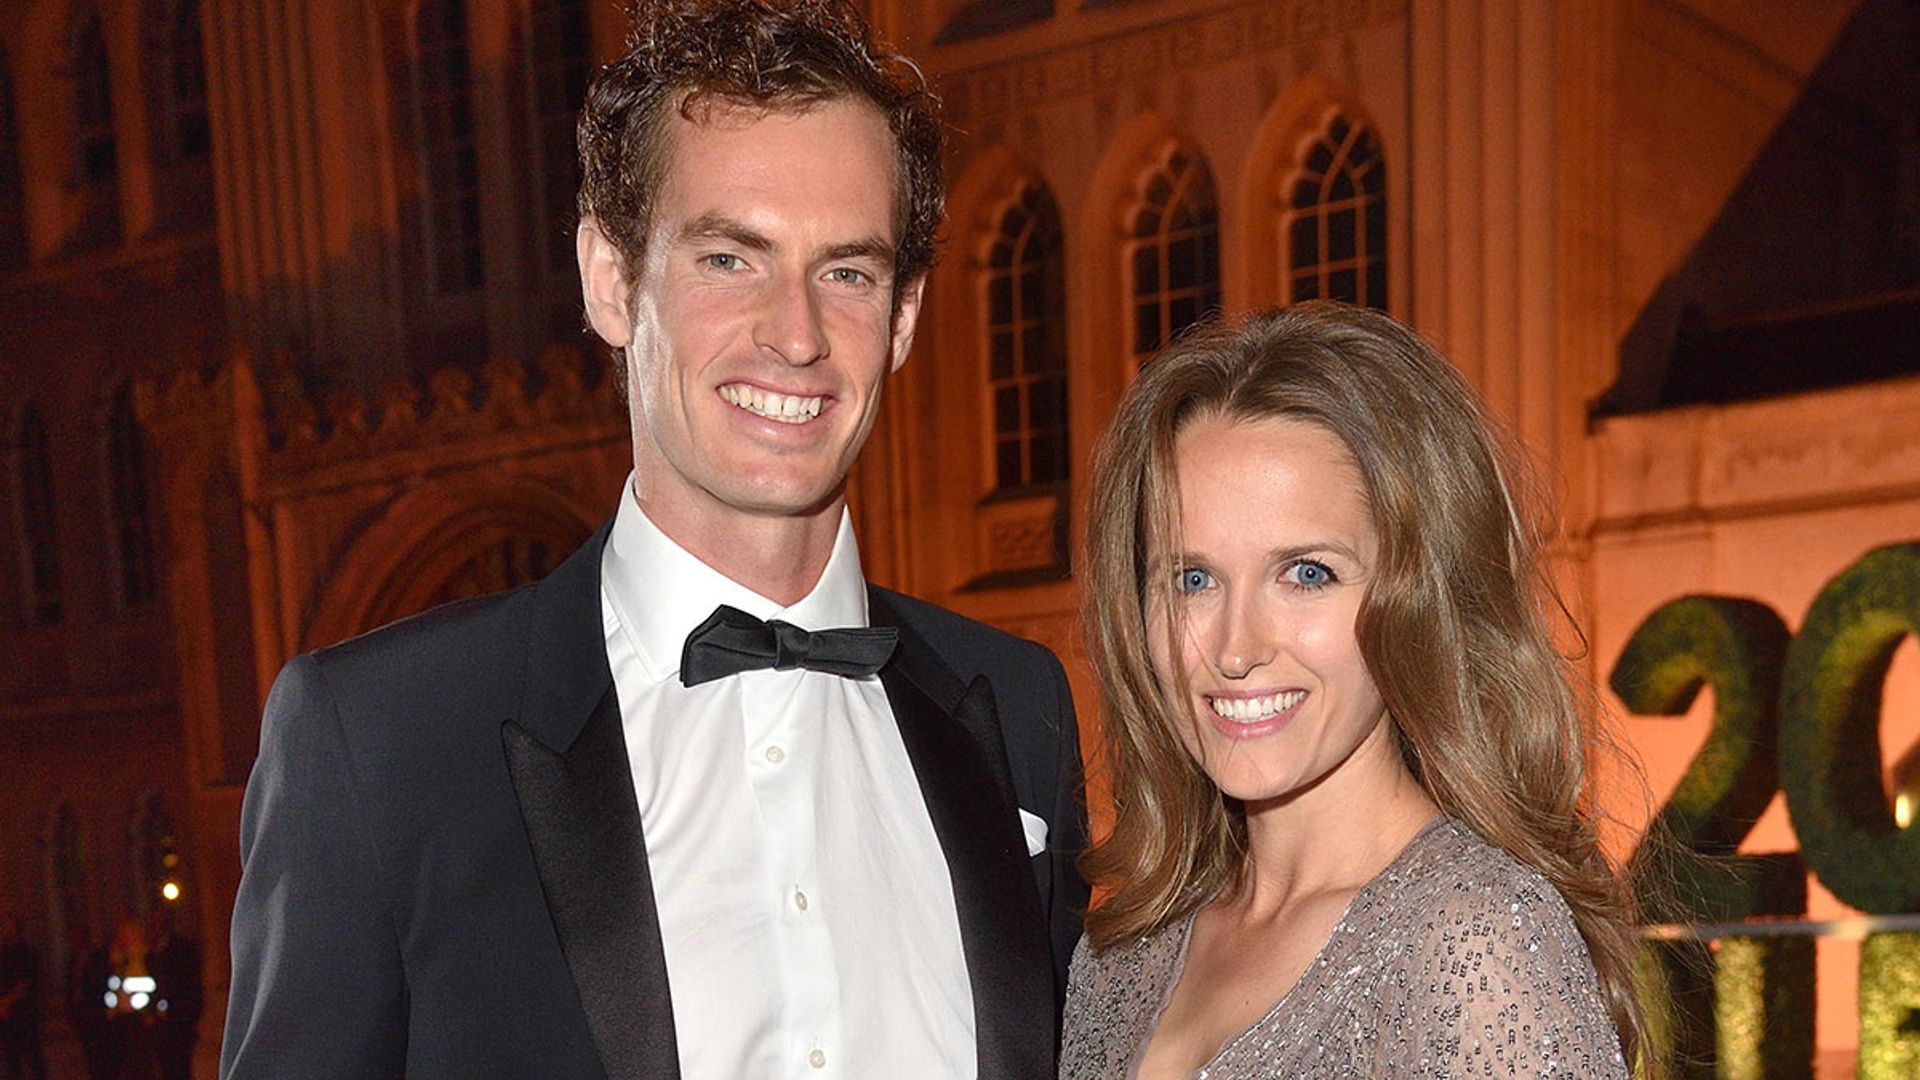 Andy Murray shares beautiful photo of wife Kim to celebrate her birthday